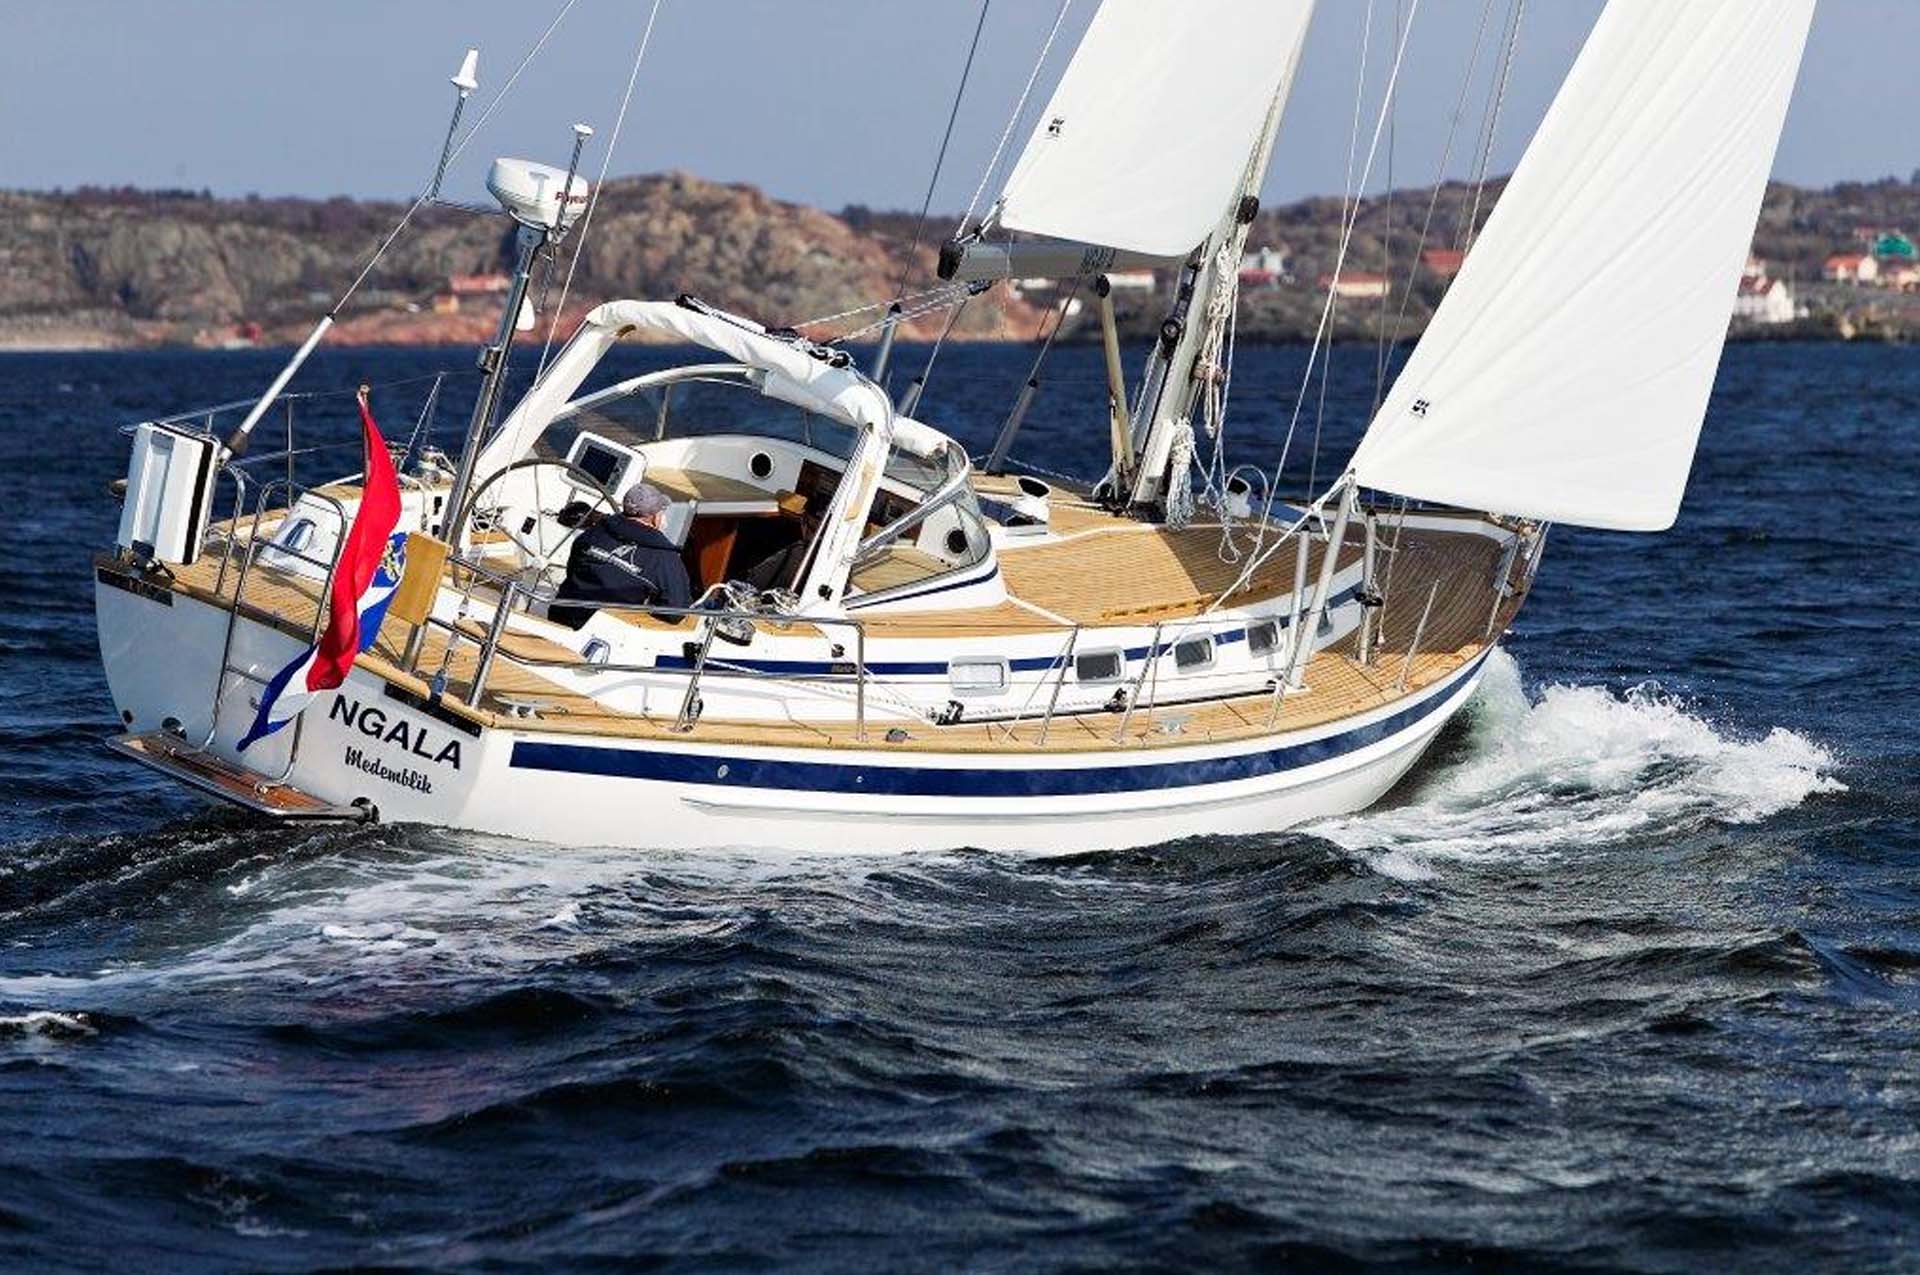 malo yachts sweden